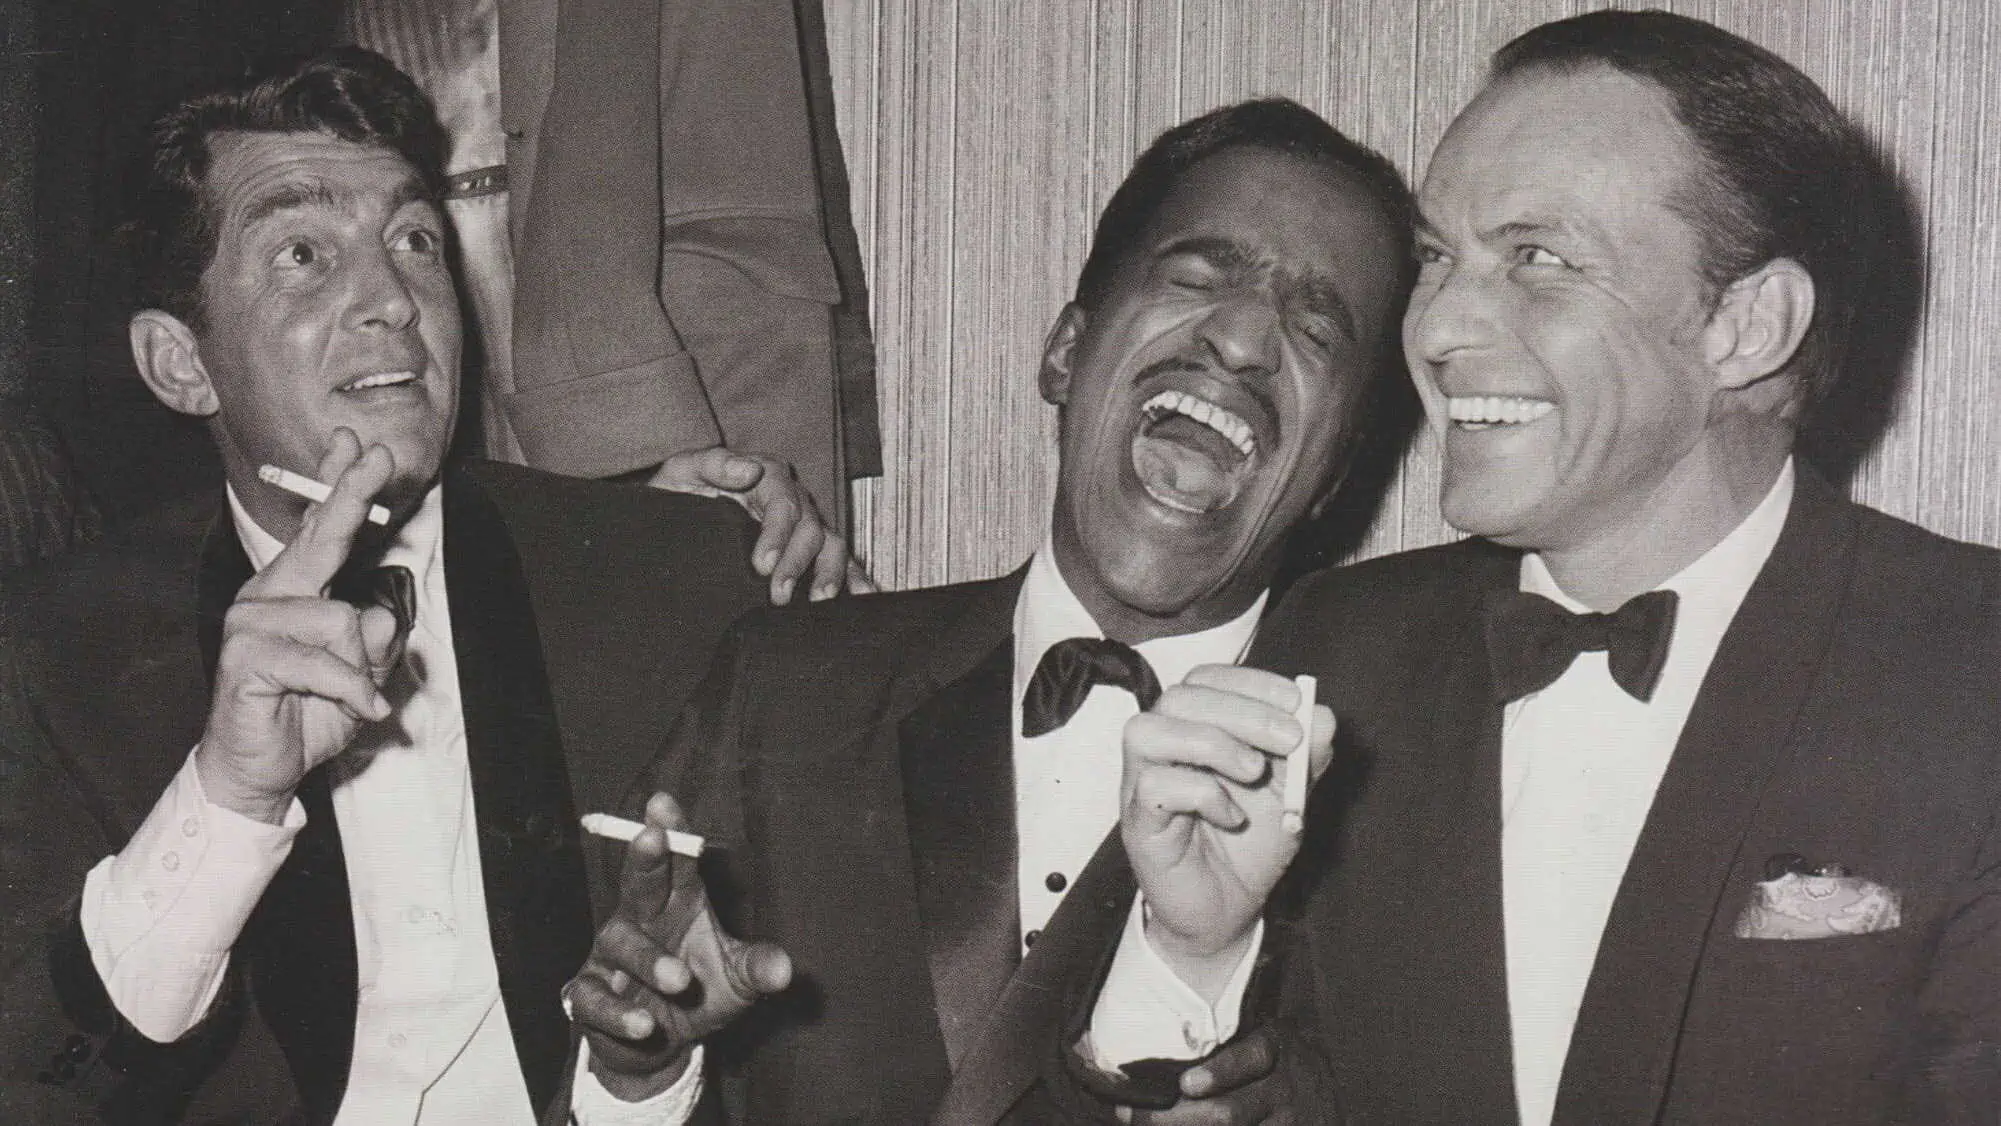 The Rat Pack in Black Tie note only sinatra has french cuffs